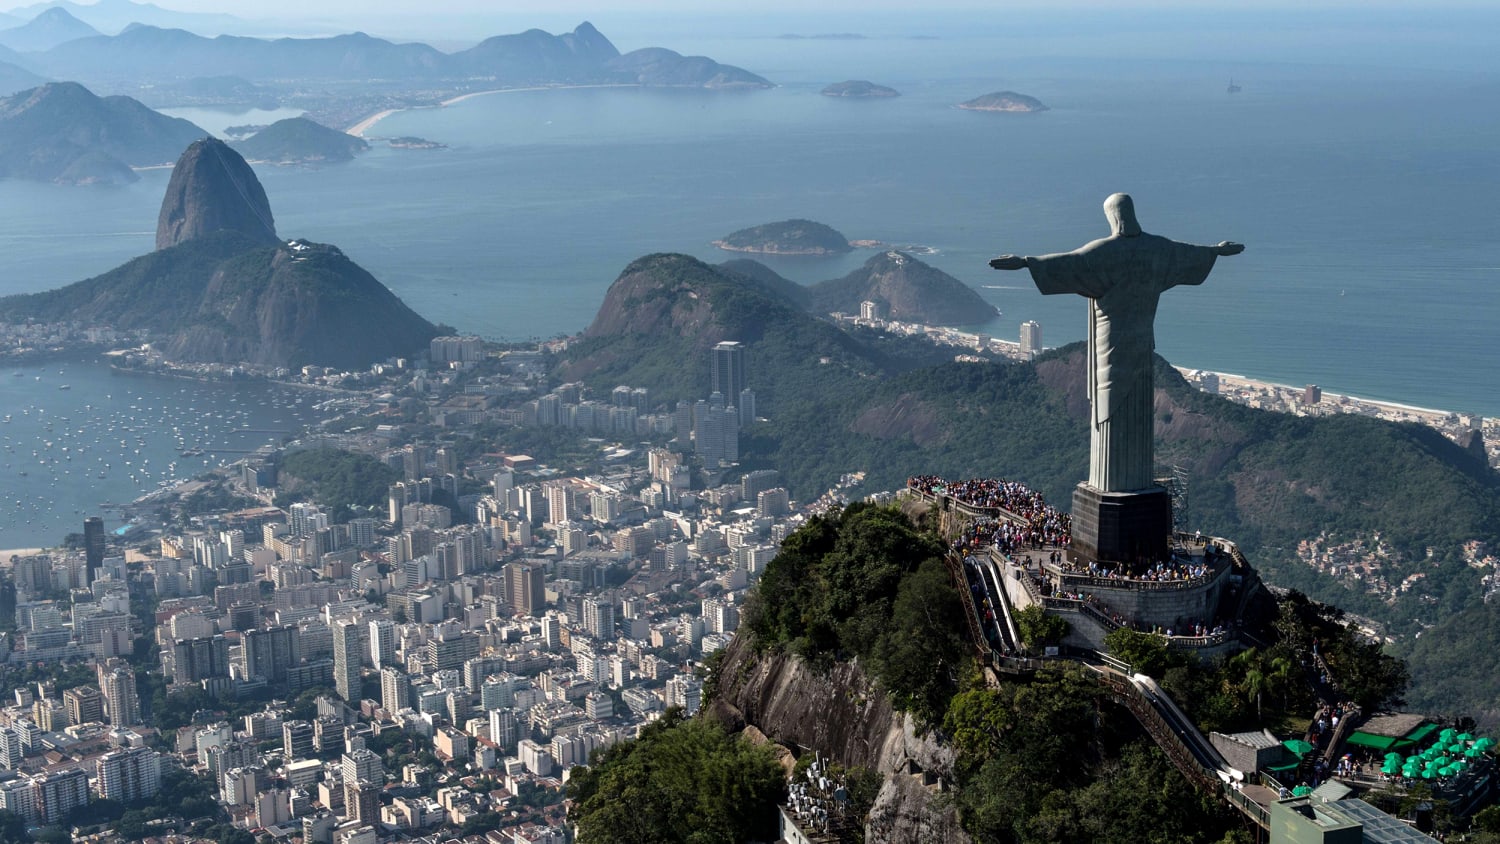 2016 Rio Olympics travel on a budget: 7 tips to save money